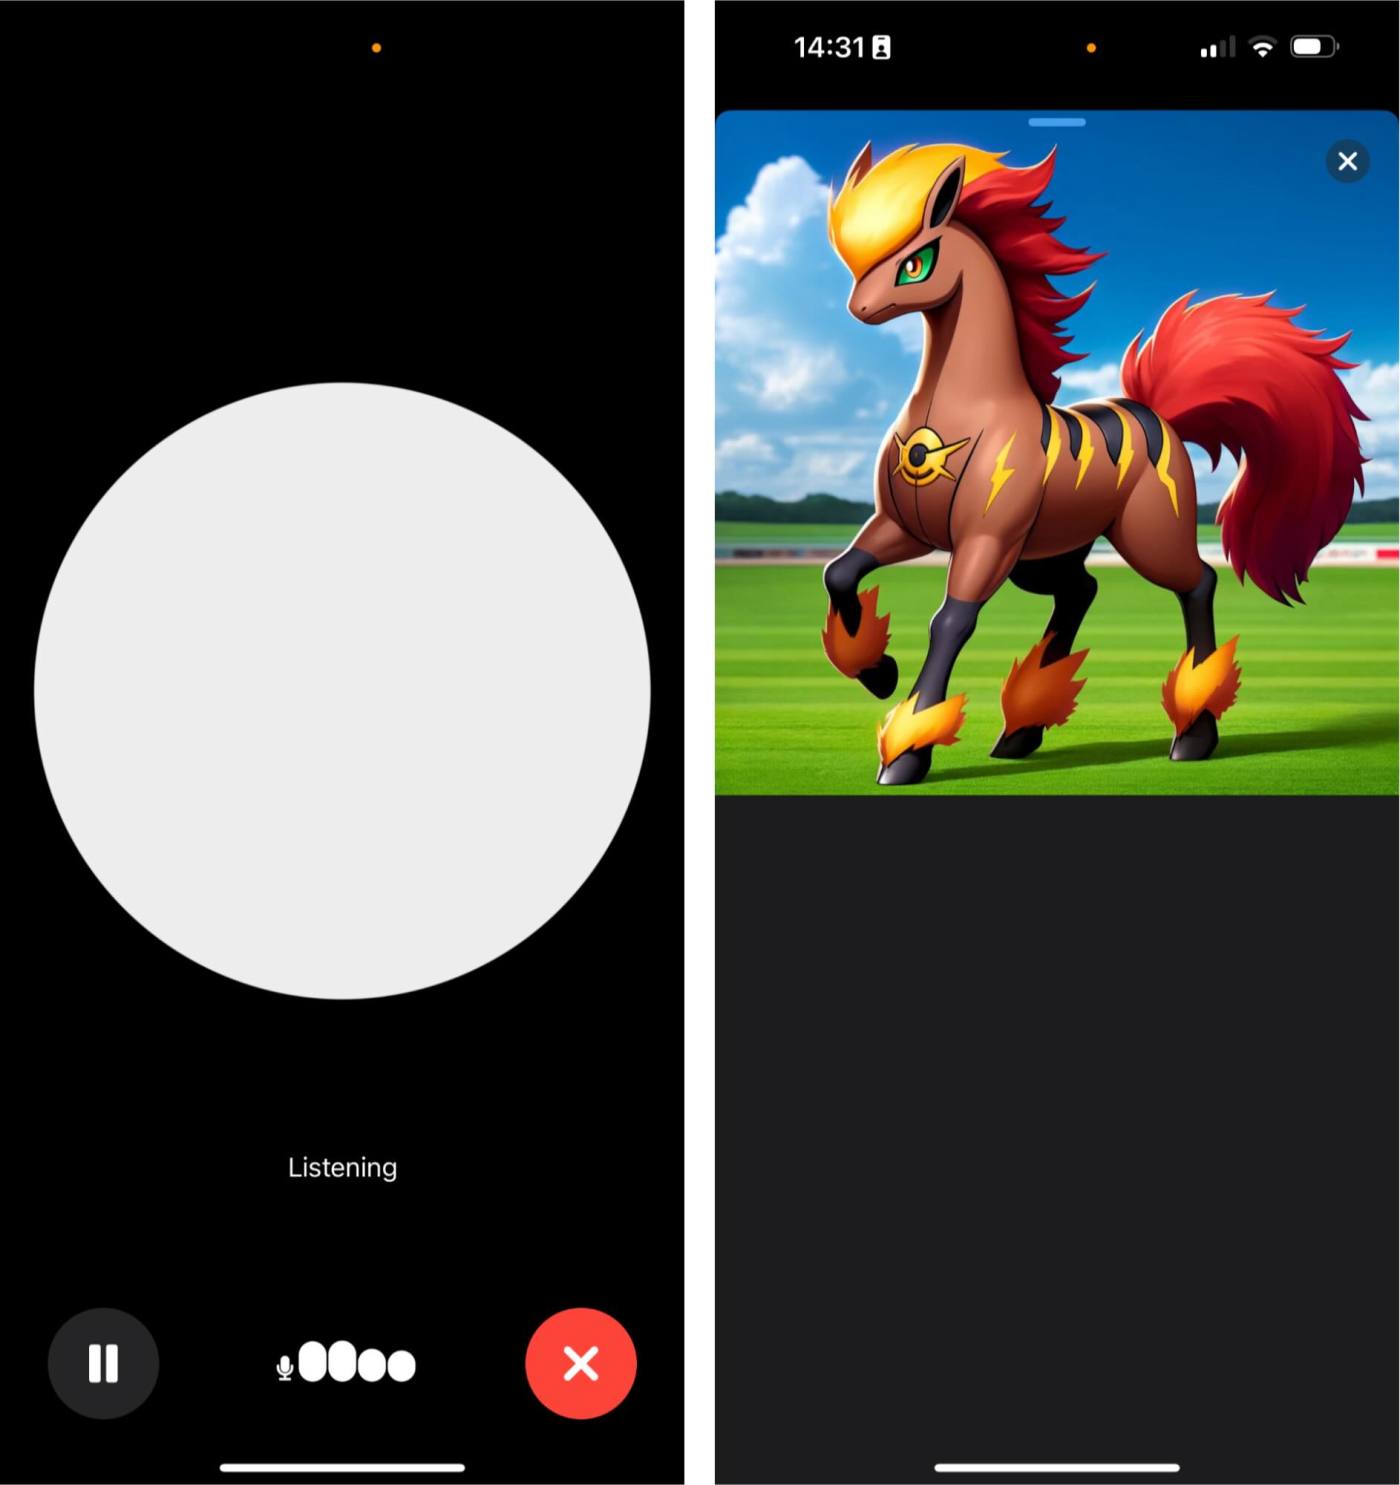 The ChatGPT interface on iOS, with audio input and image output